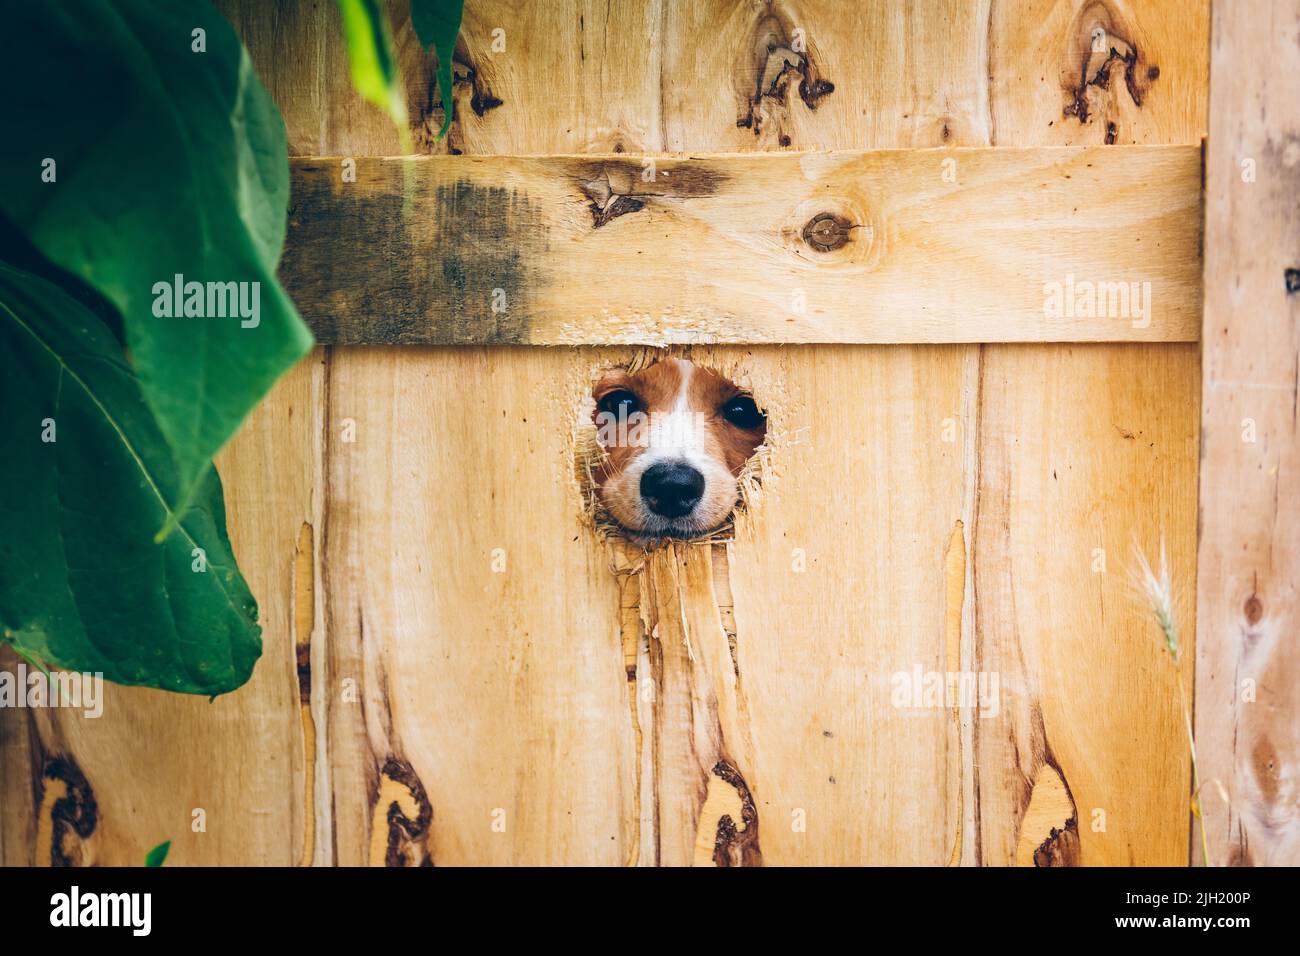 The dog gnawed a hole in the fence to get out. Ukrainian volunteers are engaged in rescuing animals in Ukraine. Volunteers help Ukrainian pets. Stock Photo